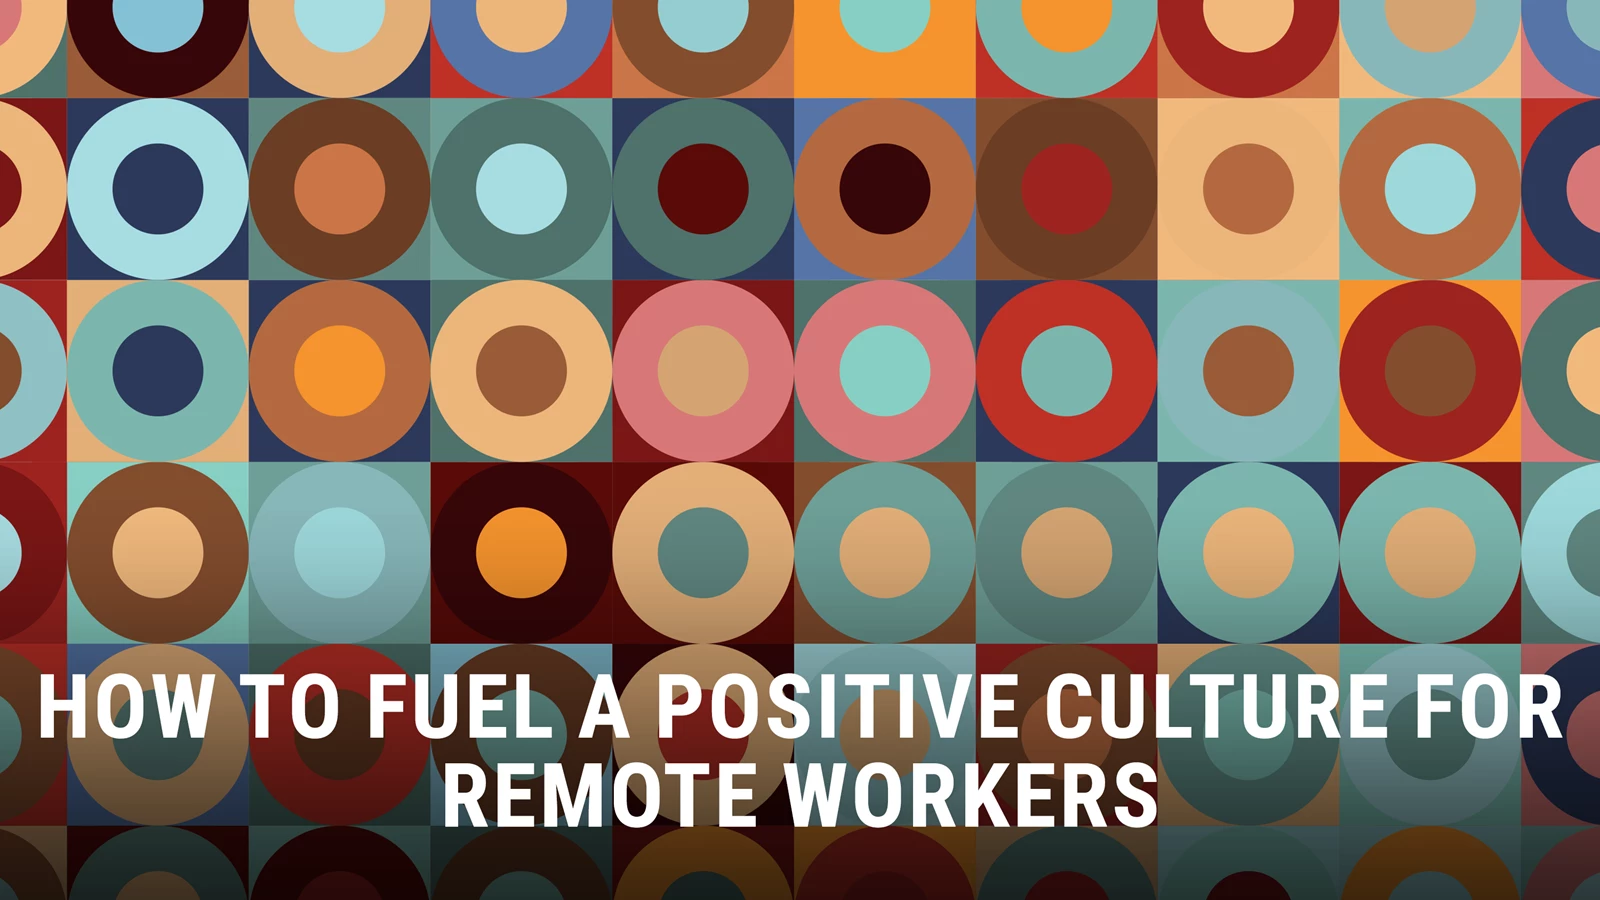 Positive culture for remote workers guide cover